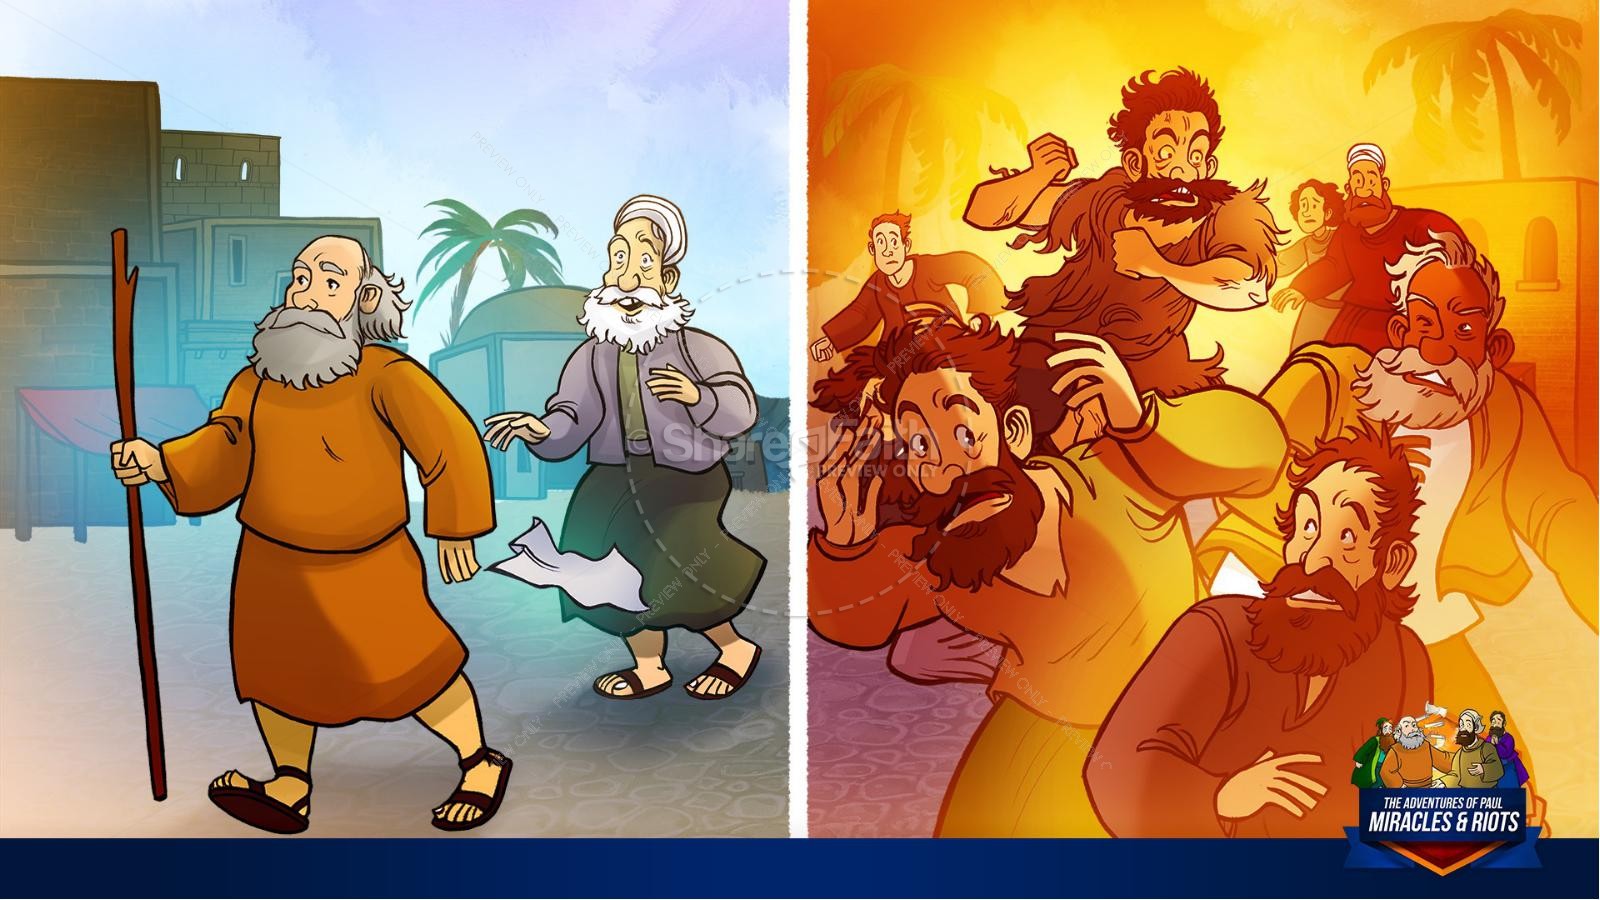 Acts 19 Miracles & Riots Kids Bible Story | slide 18